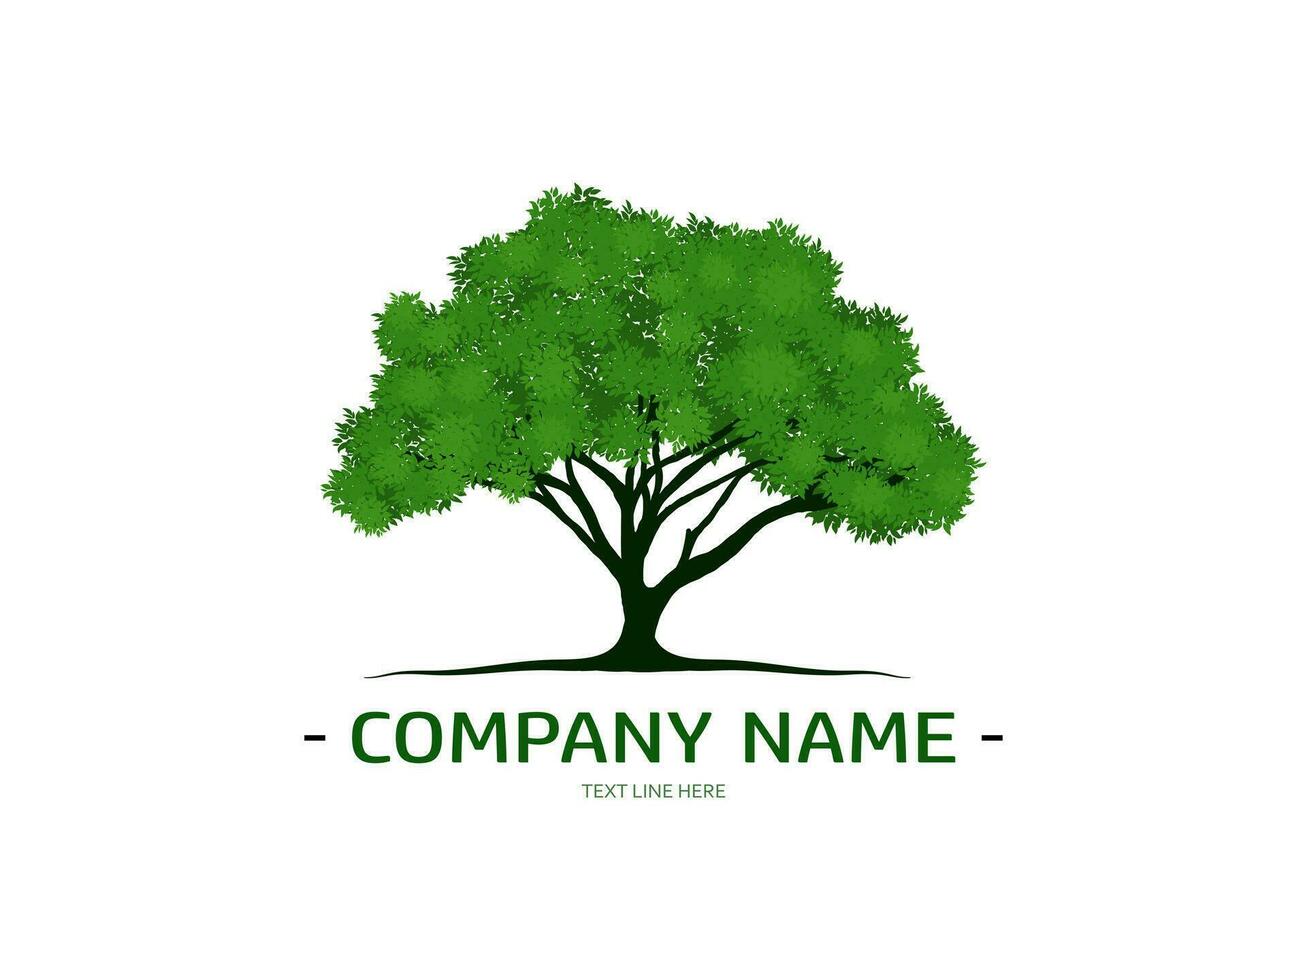 Trees and root with green leaves look beautiful and refreshing. Tree and roots LOGO style. vector